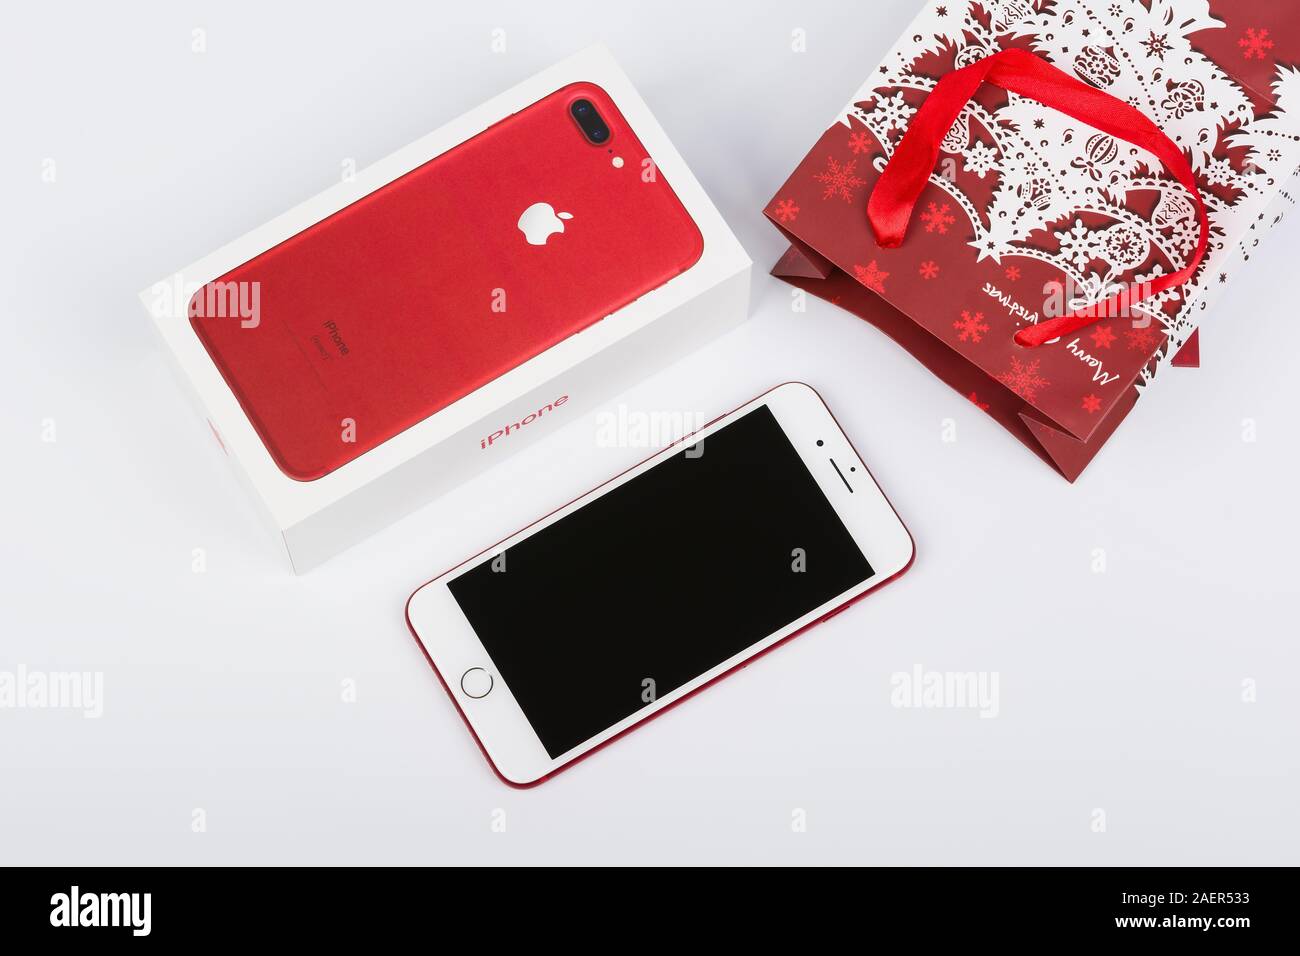 BURGAS, BULGARIA - DECEMBER 10, 2019: Apple iPhone 7 Plus Red Special Edition on white background, front side. Christmas gift. Stock Photo